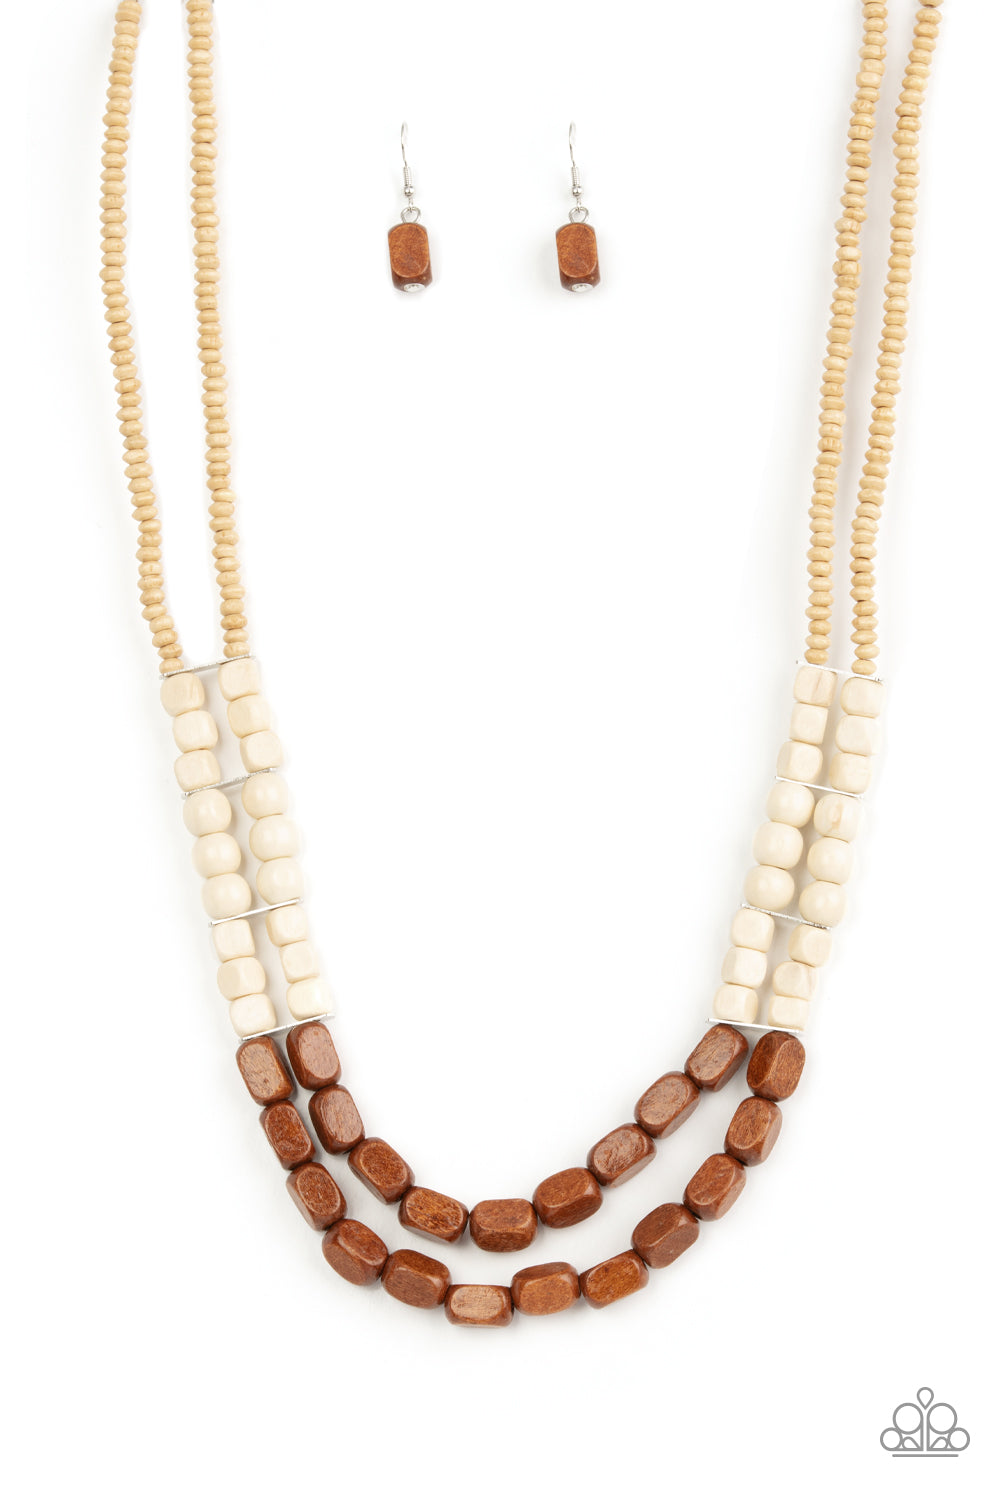 Bermuda Bellhop Paparazzi Accessories Necklace with Earrings Brown